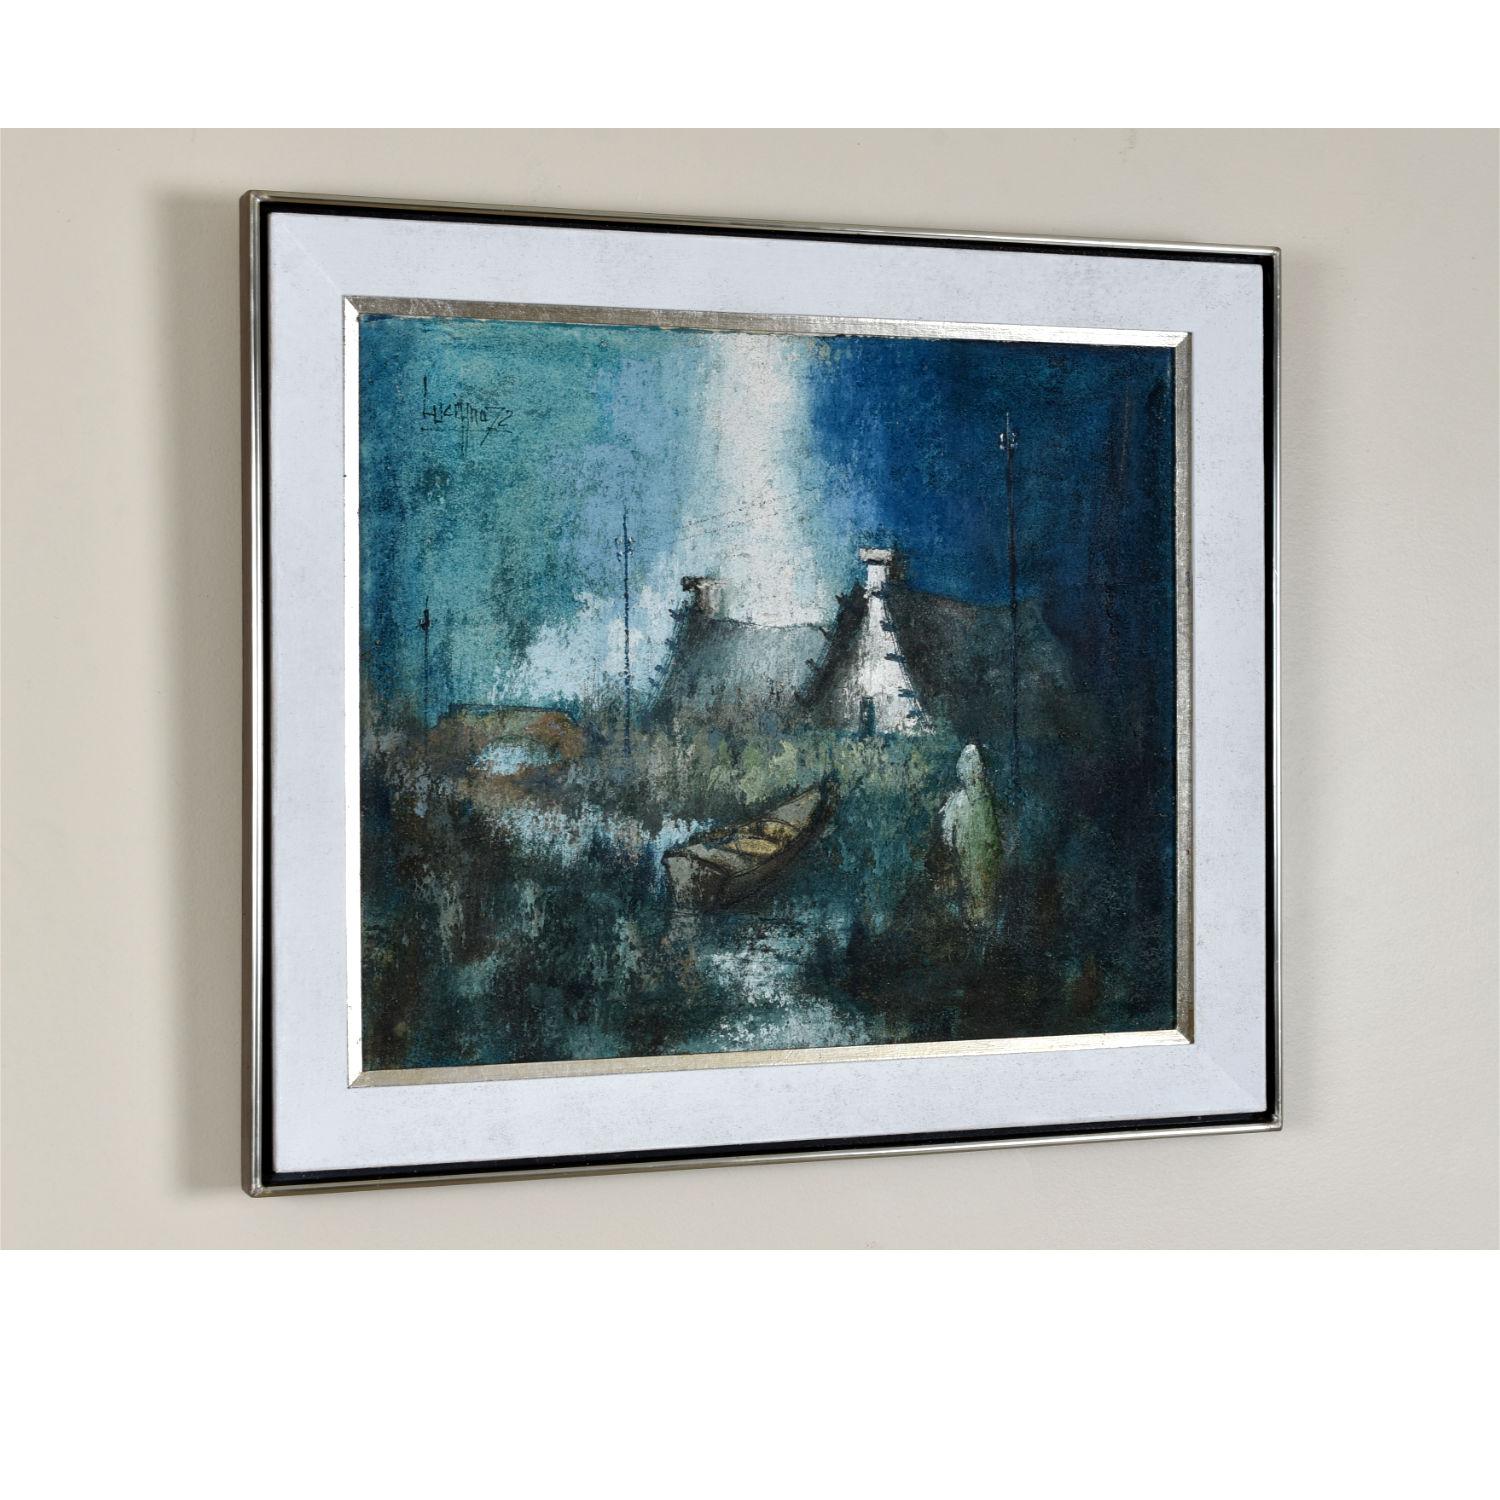 Sublime Expressionist Blue White and Teal Village Landscape Painting with Boat For Sale 2